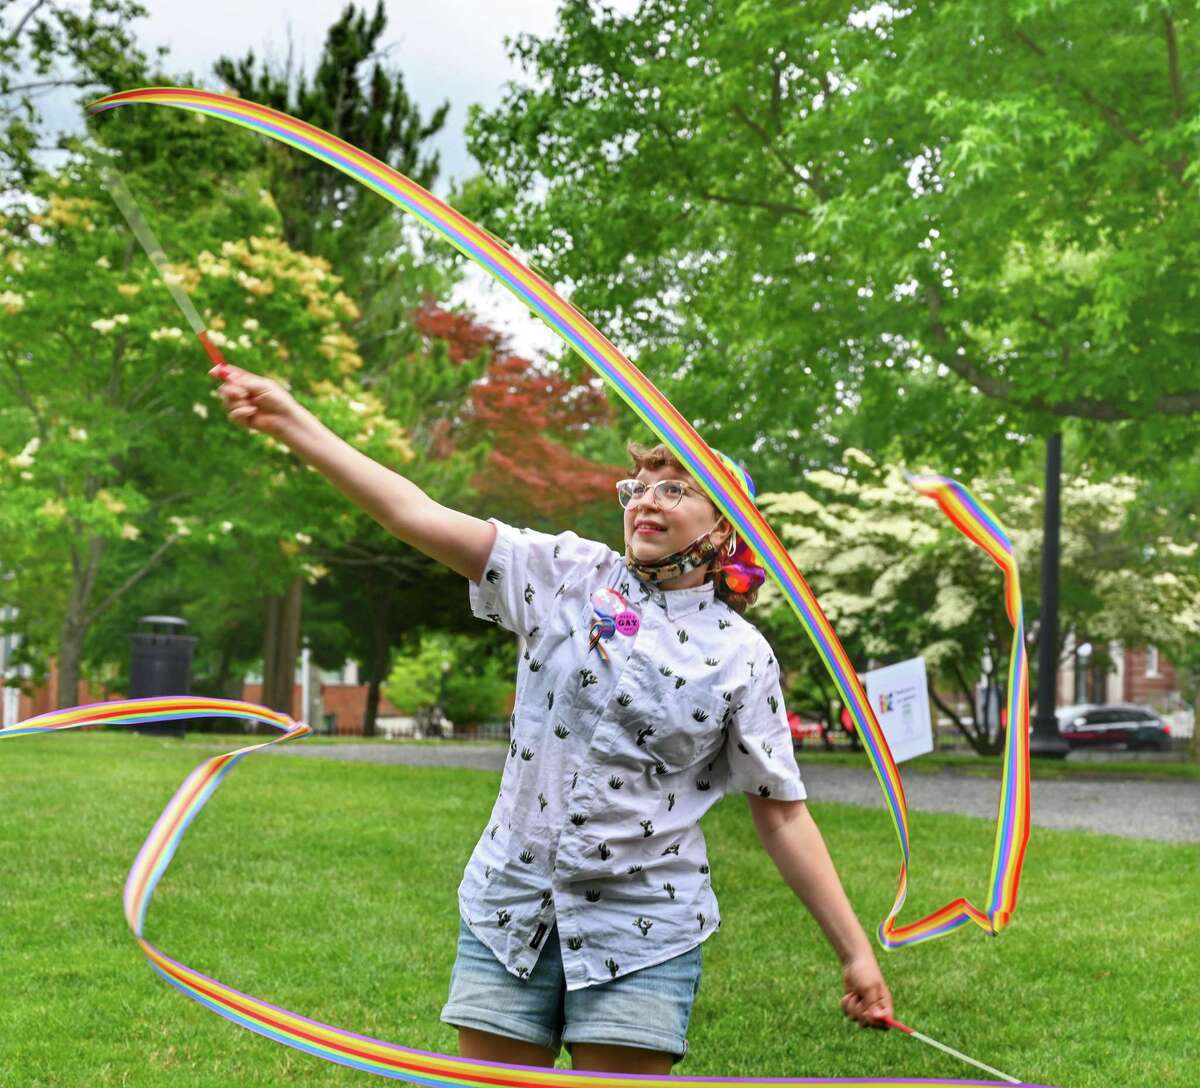 An attendee of Ridgefield's Pride in the Park event at the Ballard Park in Ridgefield, has fun with ribbons at the event.